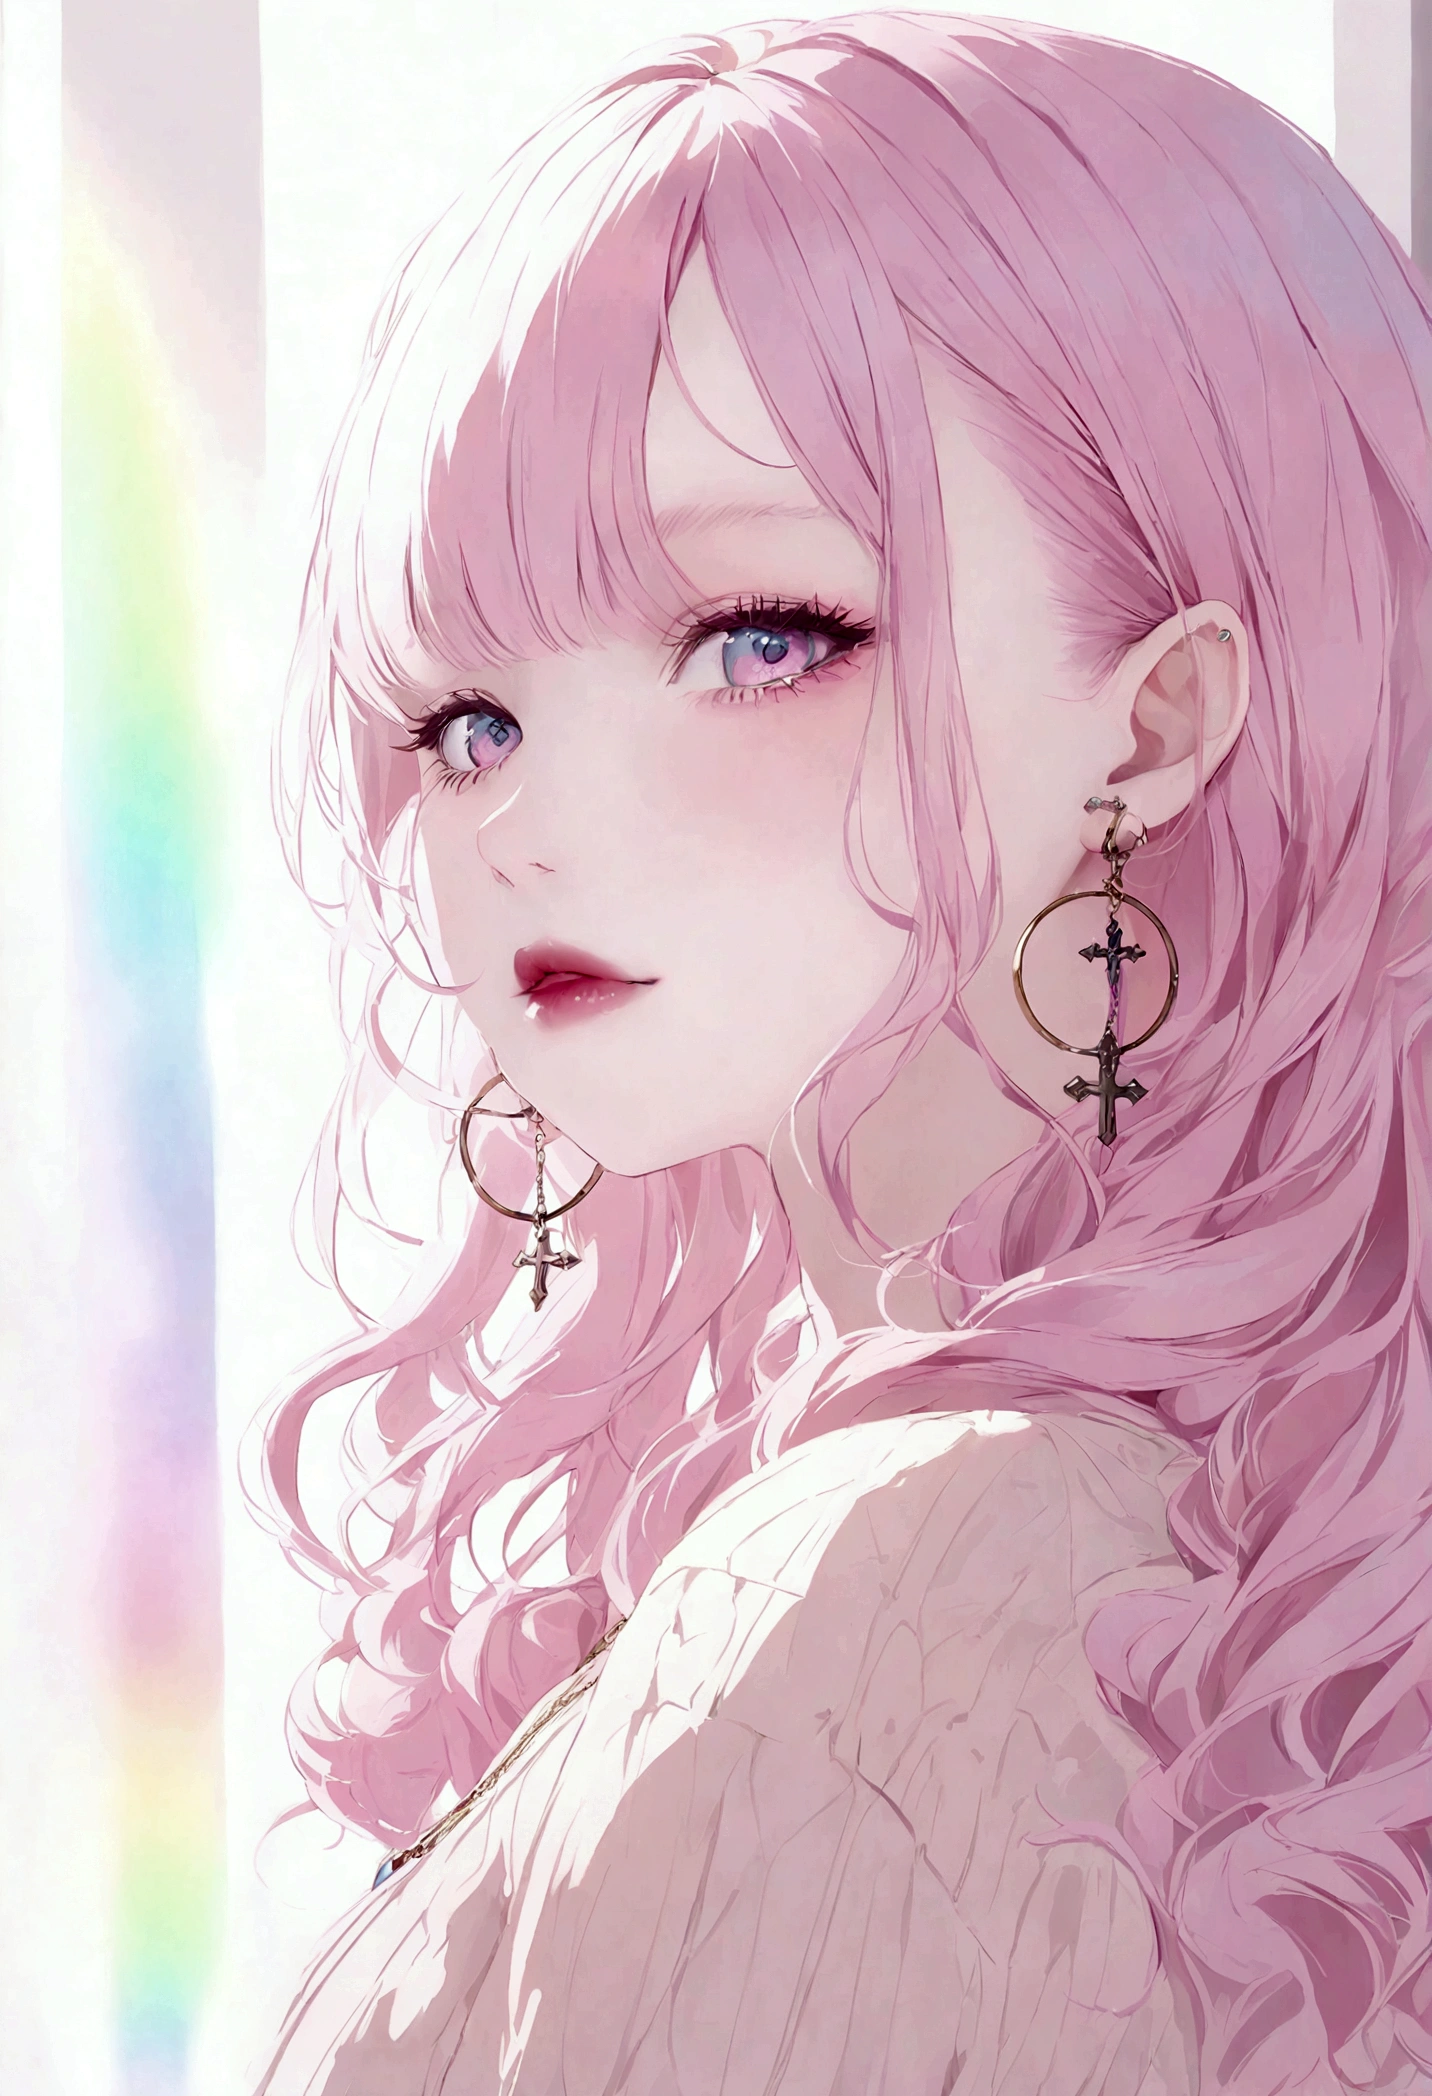 rainbow, One Girl, alone,Super cute, Long Hair, View Viewer, Blue Eyes Background, White Background, jewelry, Mouth closed, Jacket, Upper Body, Pink Hair, Earrings, Pink Eyes, necklace, From the side, sweater, lips, eyelash, compensate, Wavy Hair, Earrings, cross, lipstick, 耳のEarrings, eye shadow, hoop Earrings, ピンクのlips, Variegated eyes, Pink Theme, , ピンクのeye shadow,